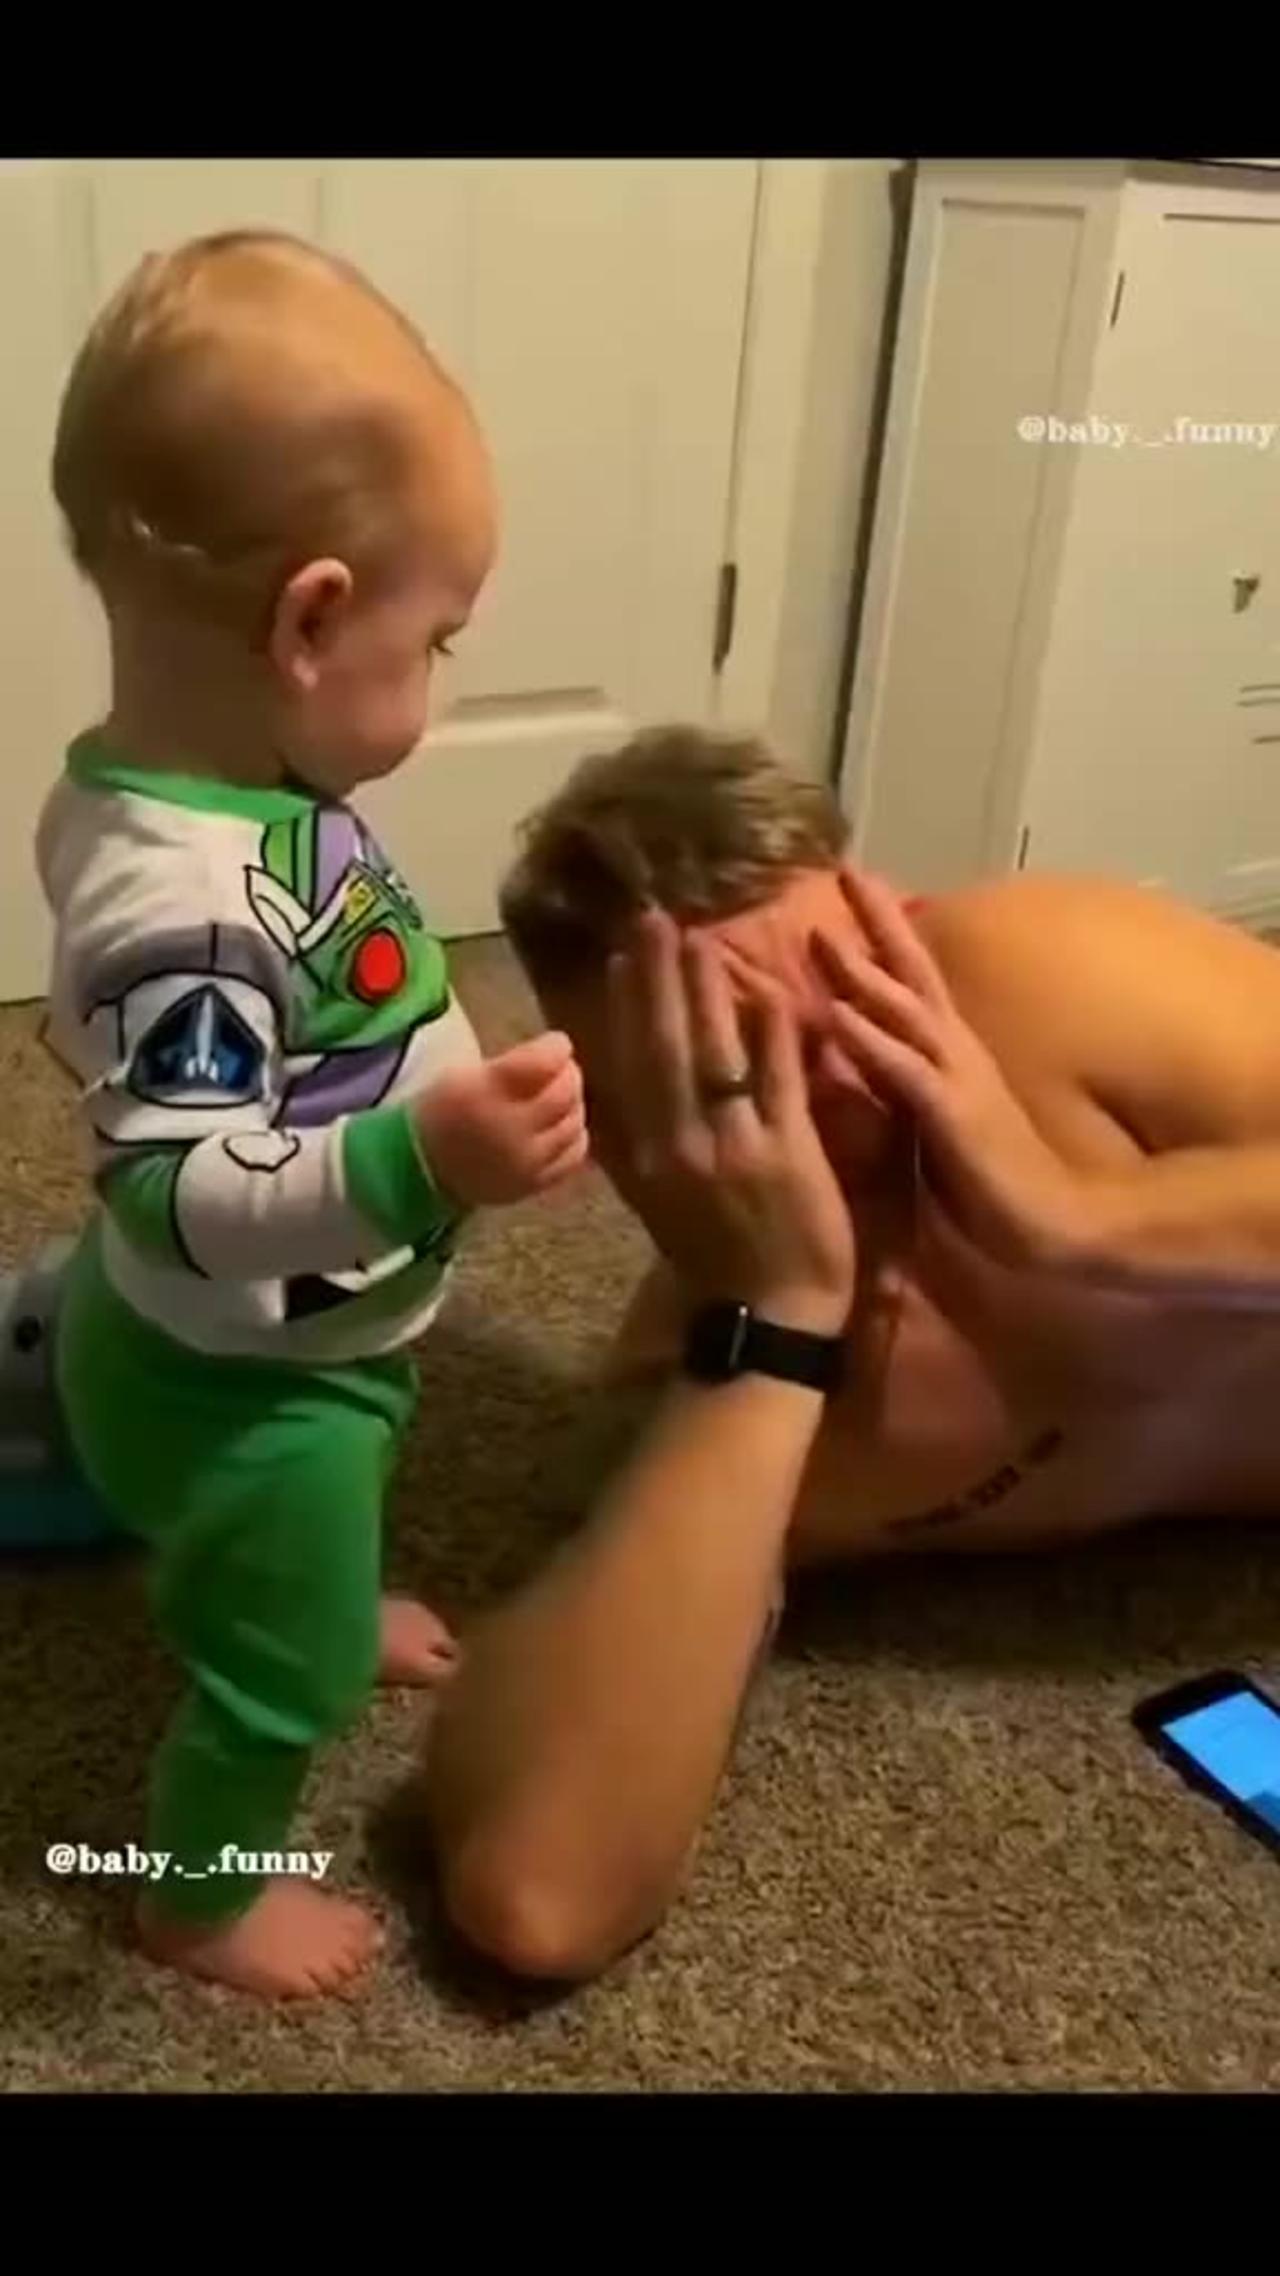 Baby funny videos. You will love this video if you like babies